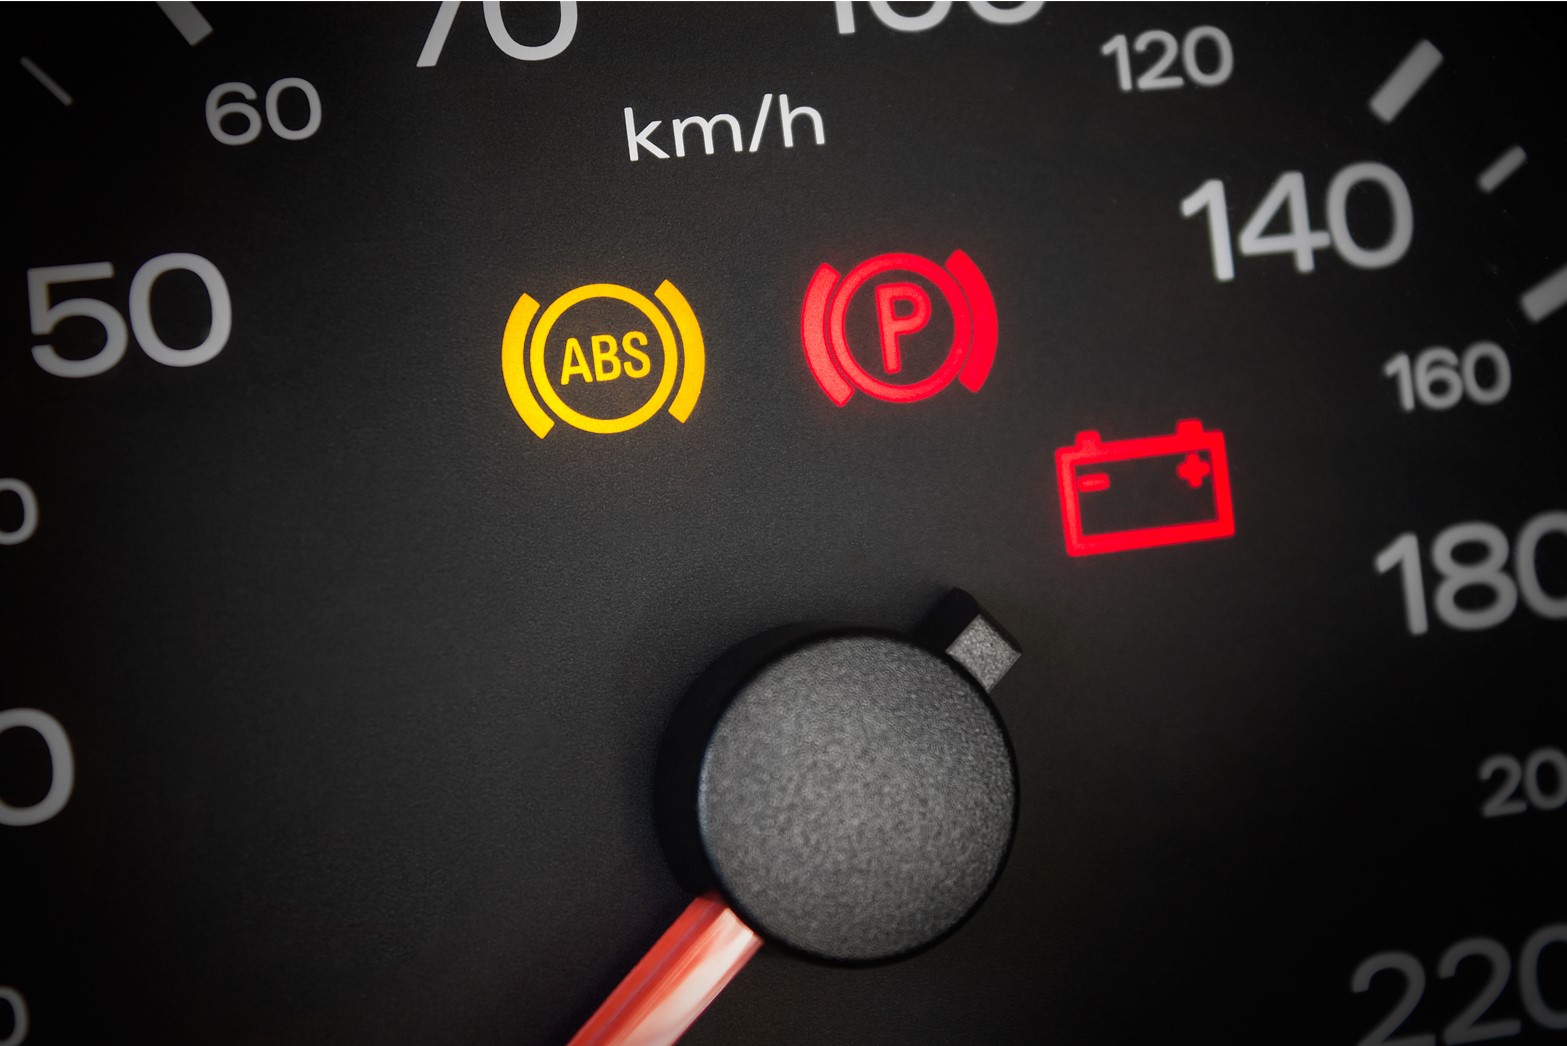 Traction Control Light On? Common Problems With Traction Control